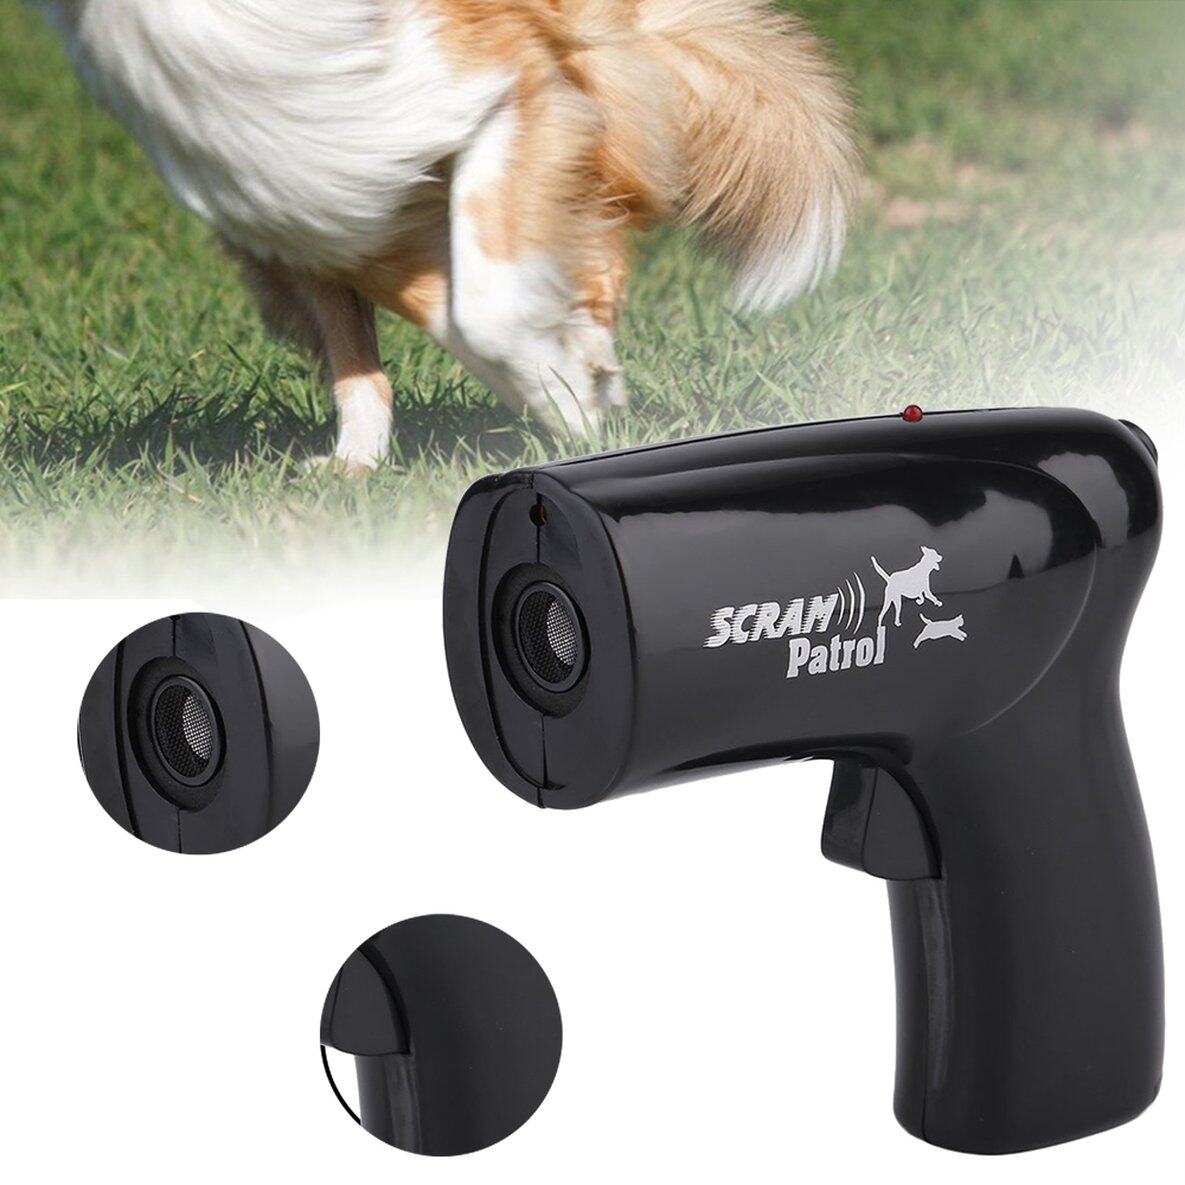 Ultrasonic Dog Cat Repeller Infrared Laser Chaser Mini Portable Animal  Trainer Bark Stop Control Device Pet Supplies (black)，3rd gear，Safe and  effective | Lazada